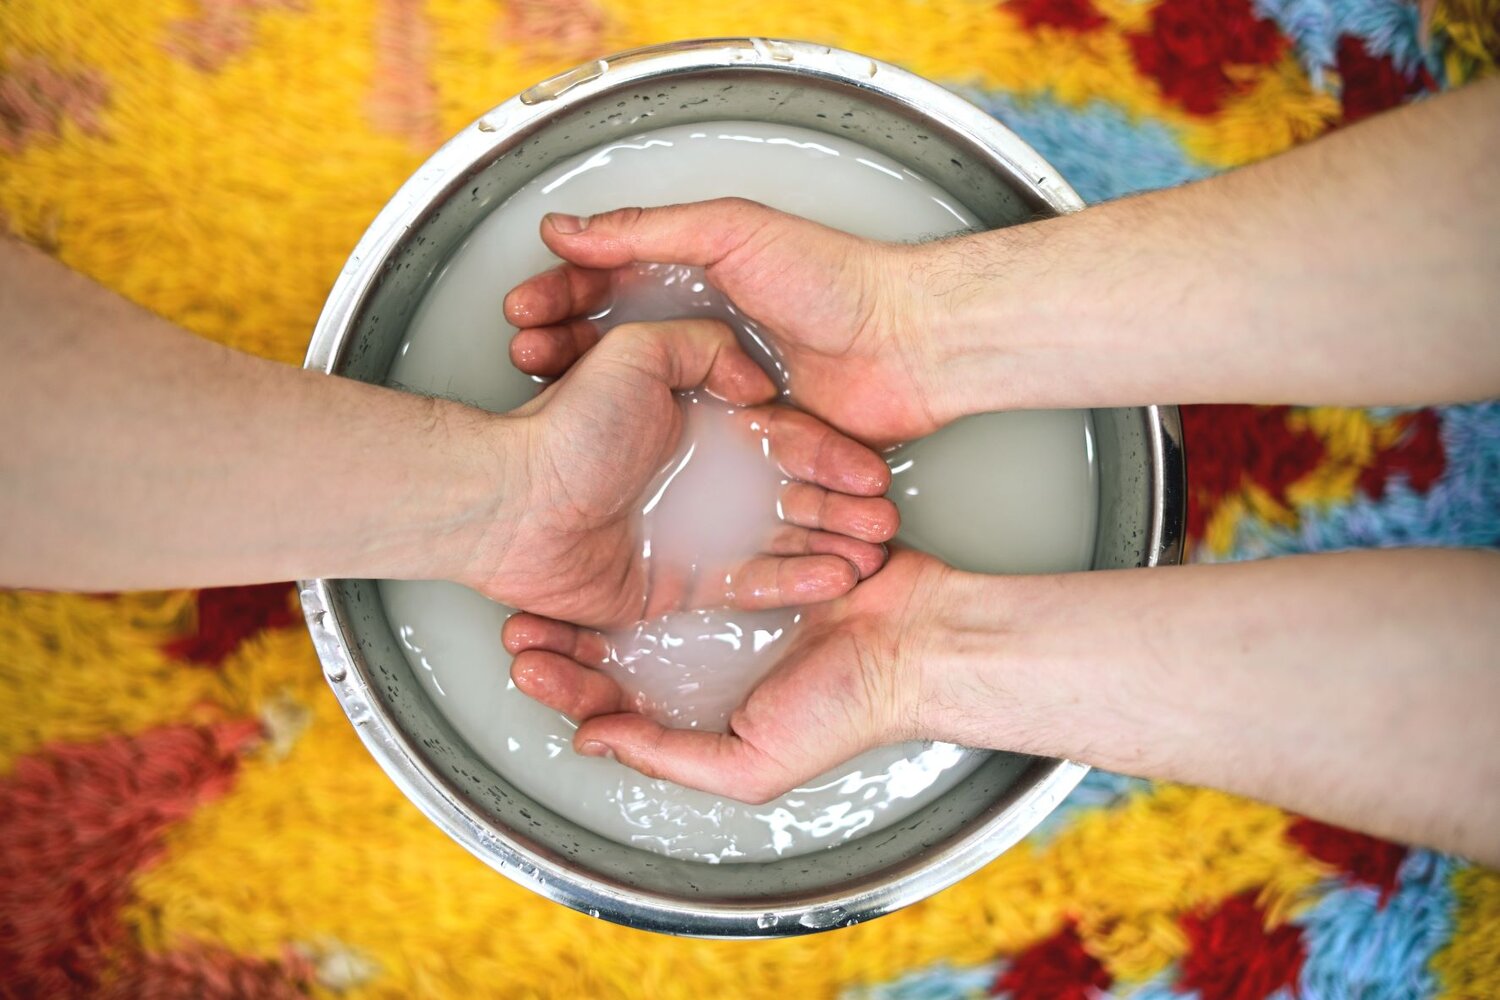 Two pairs of white hands are seen in a bowl of white fluid. The fluid is in a metal bowl, on a yellow rug. 